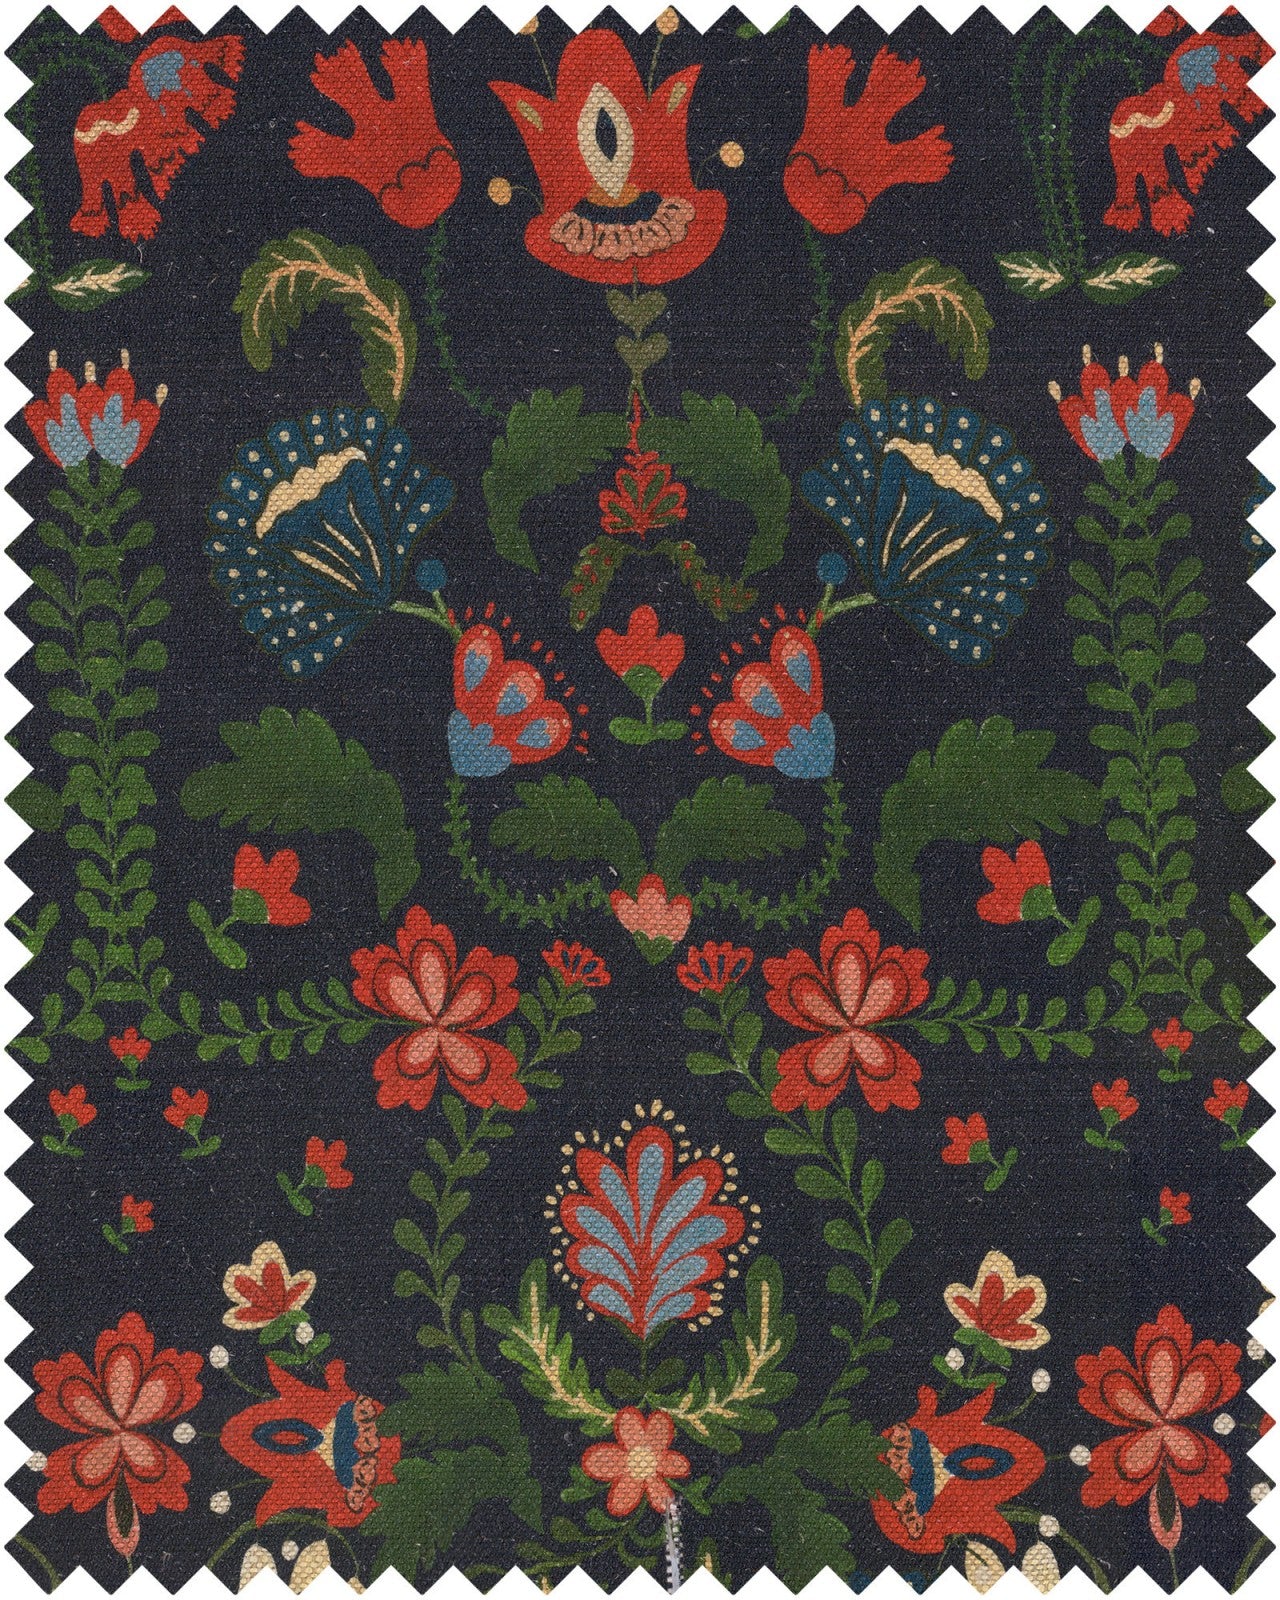 Zabola fabric in black red blue green color - pattern number FB00041 - by Mind The Gap in the Transylvanian Roots collection